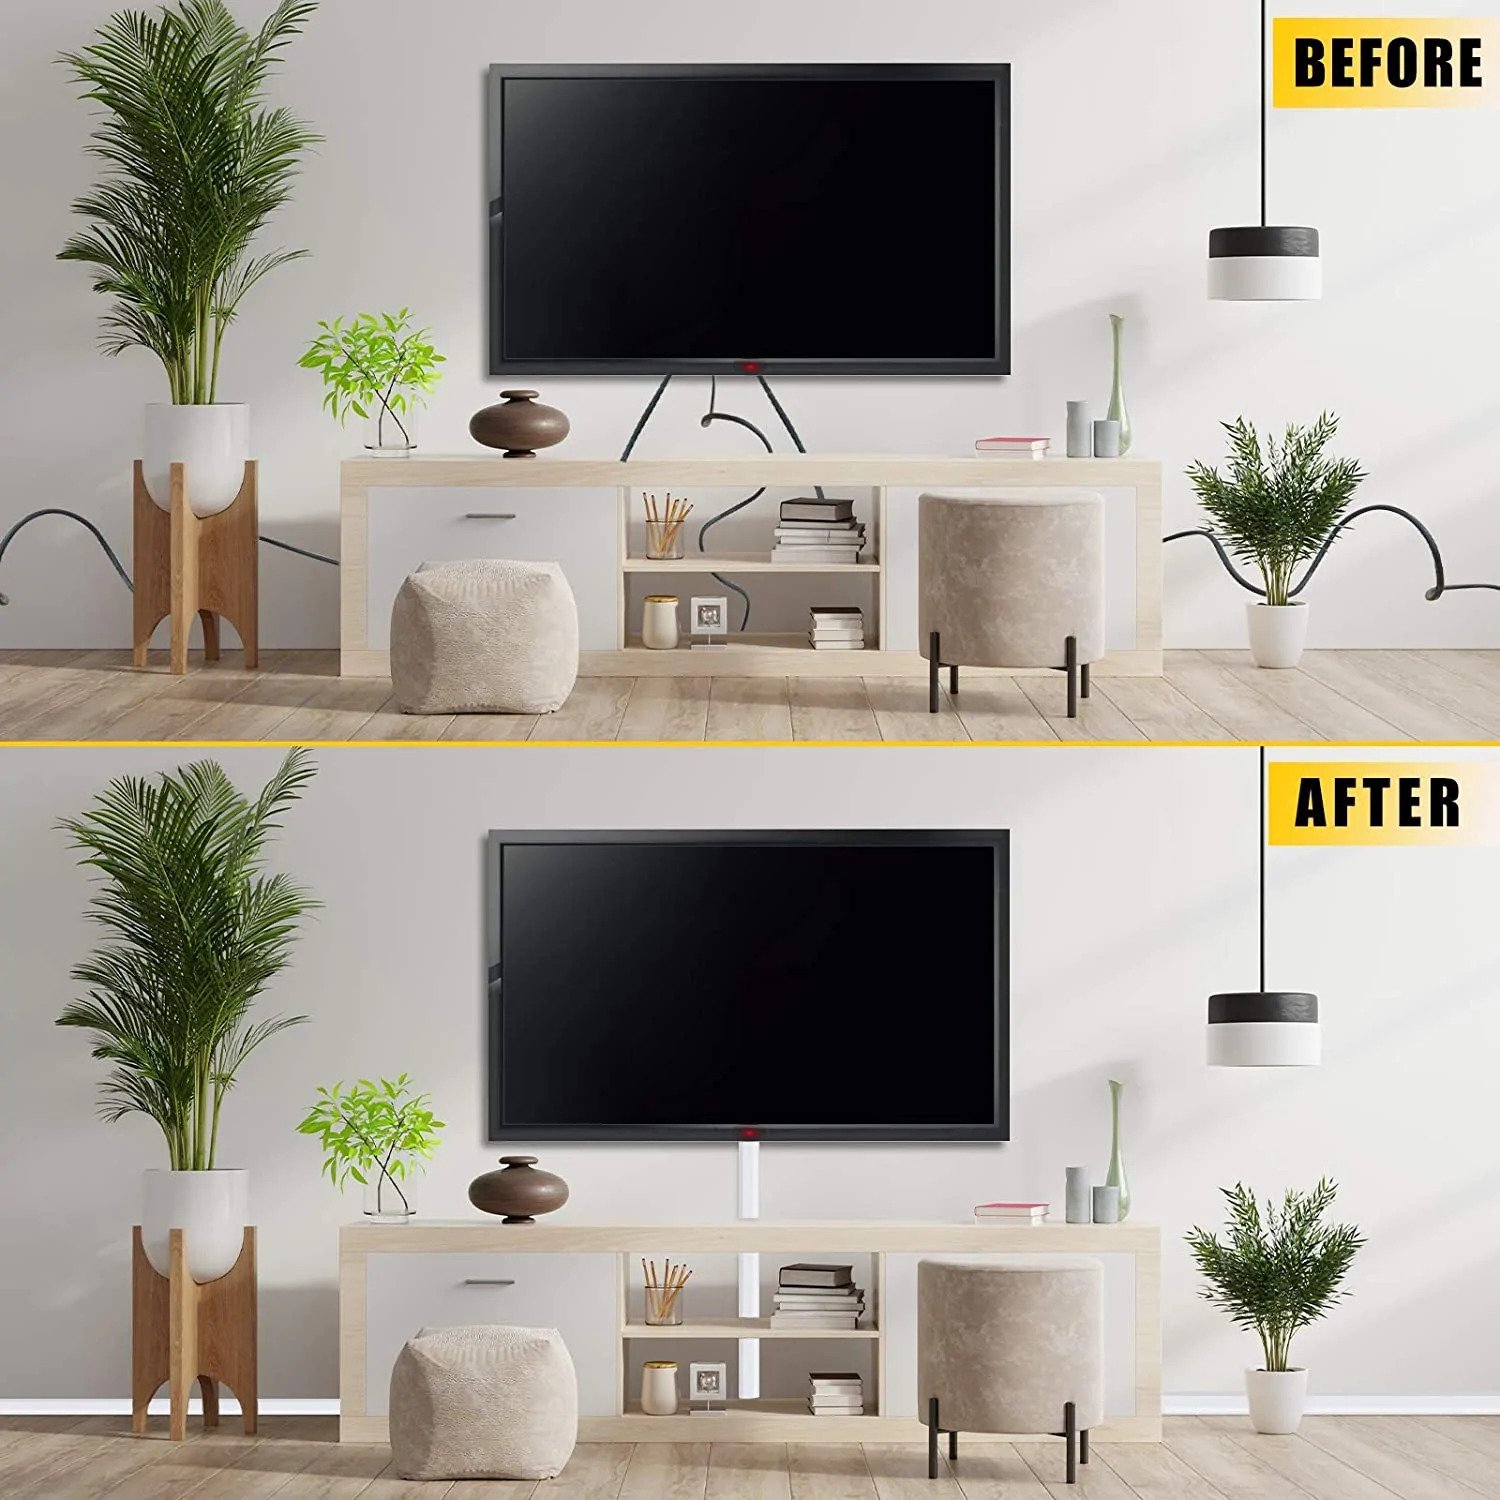 Before and After Cable Trunking Home Theatre